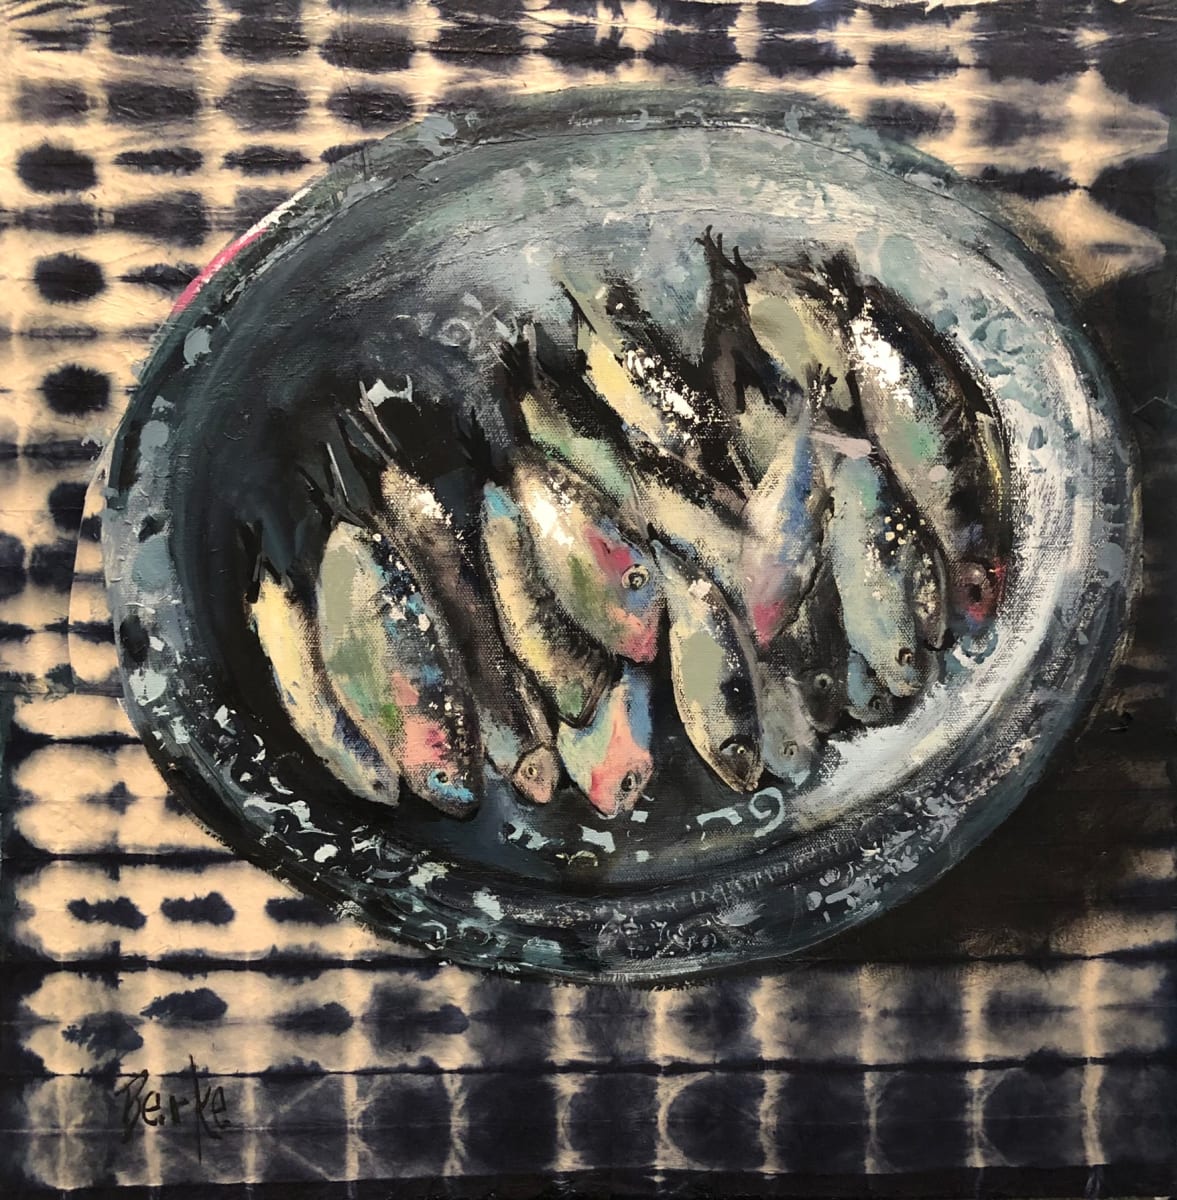 French Lunch by jane berke  Image: Sardines in a bowl